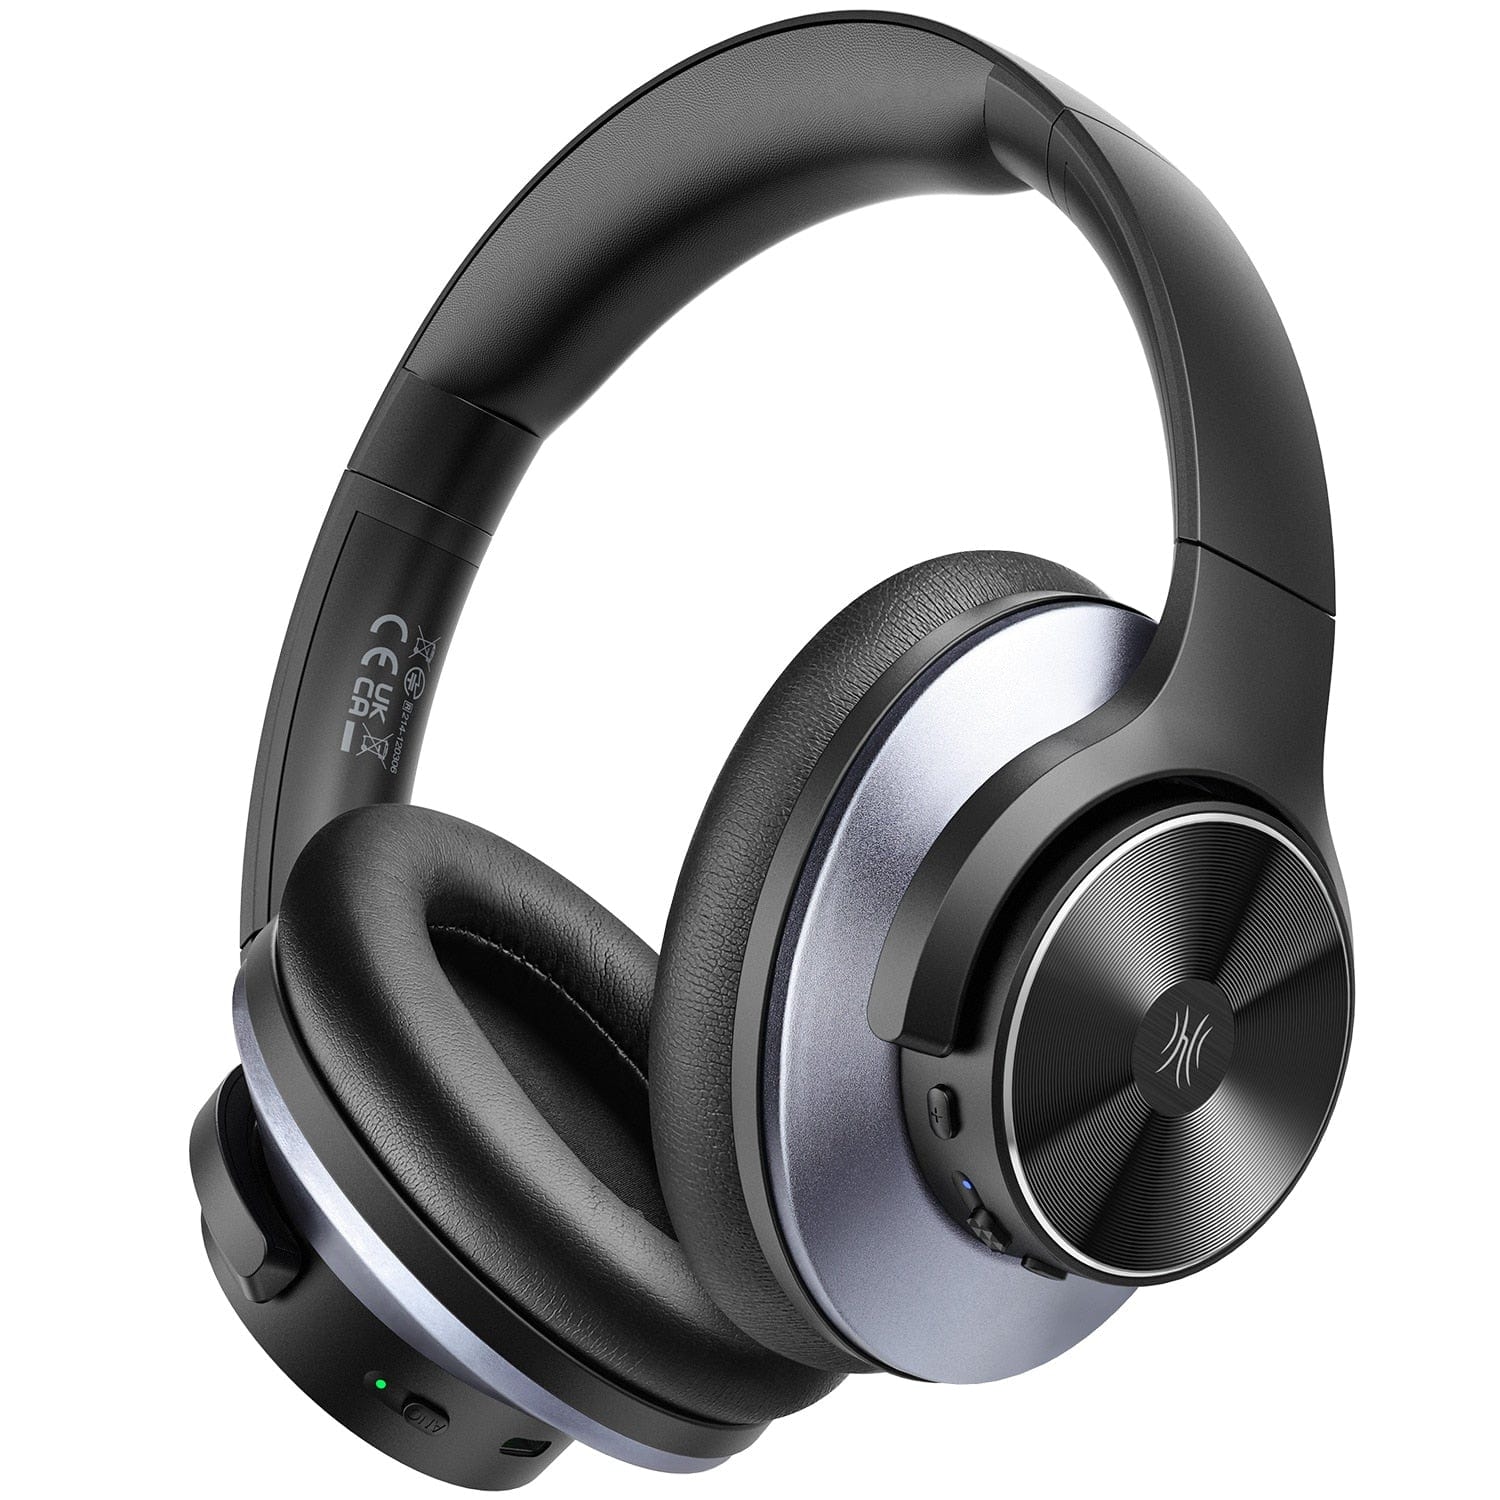 OneOdio OneOdio Wireless Headphone, Version A10, Supports Bluetooth 5.0, Playtime up to 45 Hours, Color Black